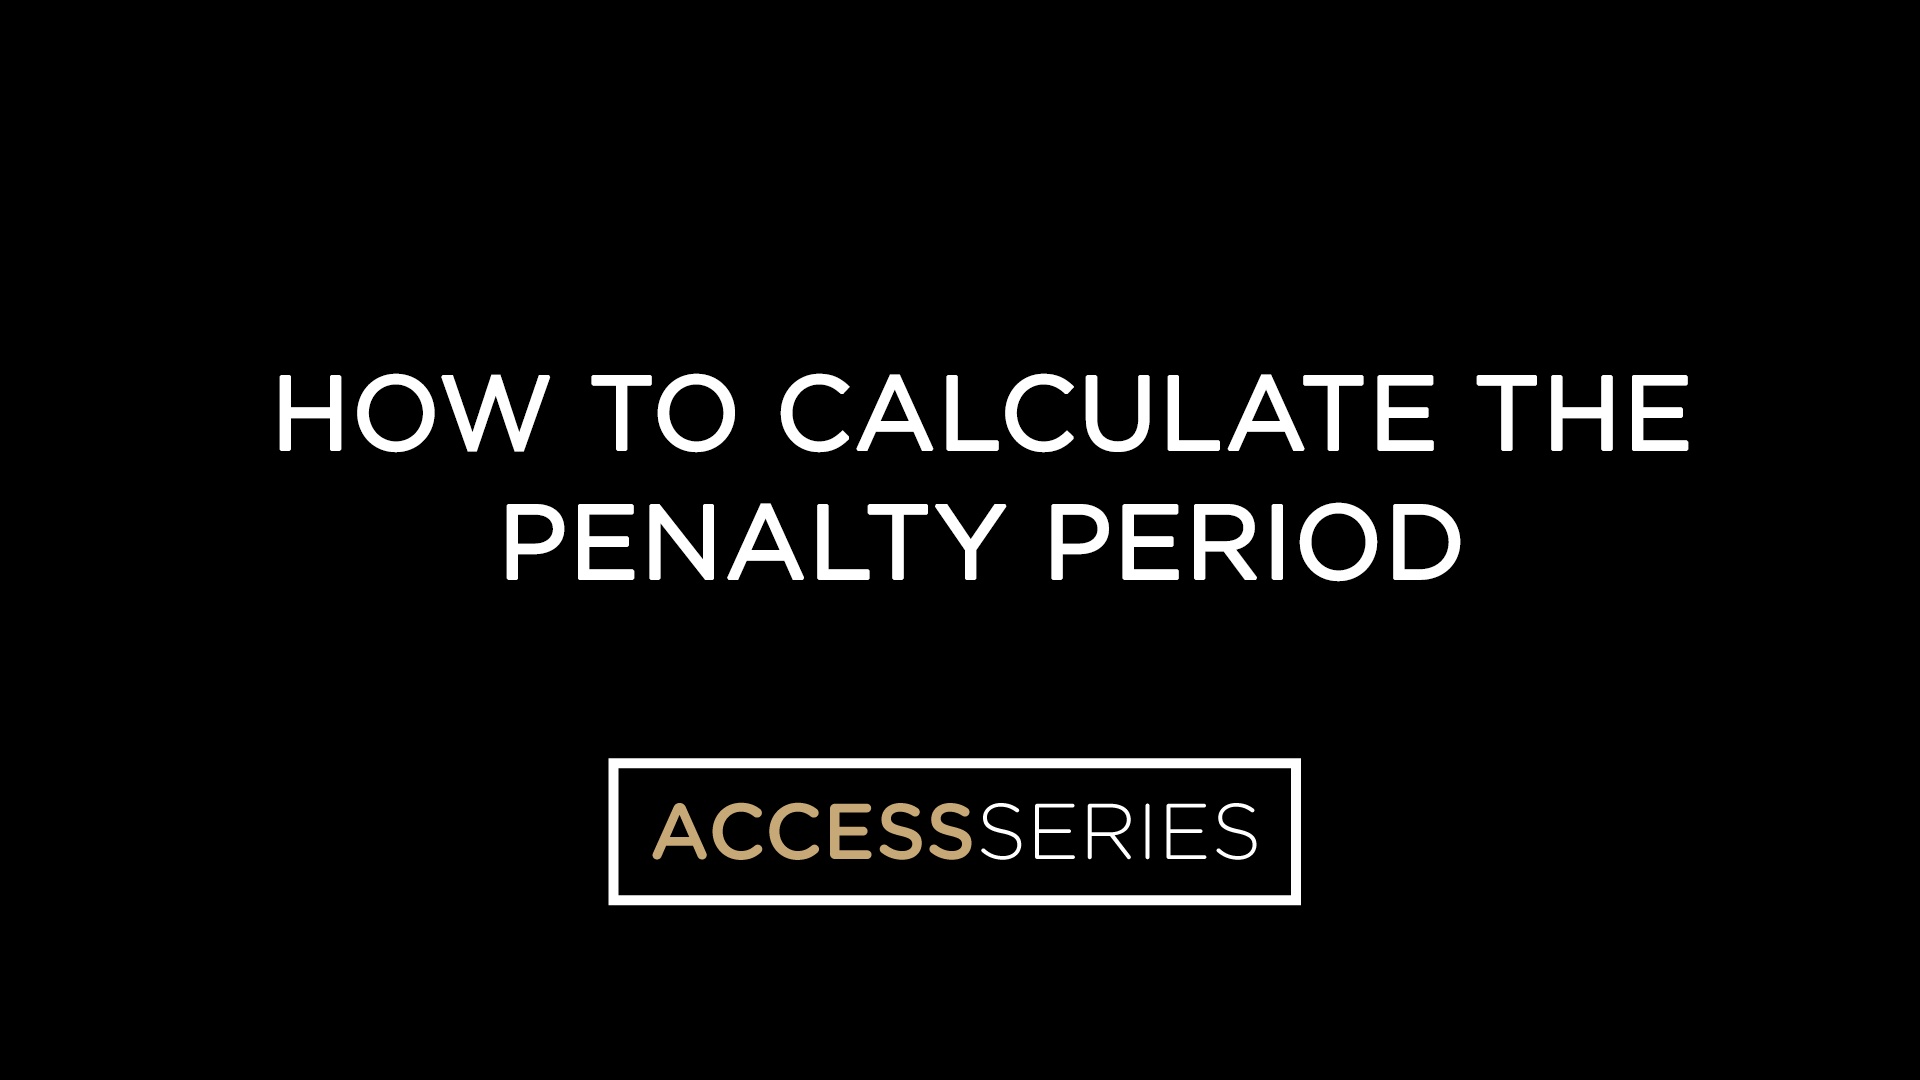 How to Calculate the Penalty Period